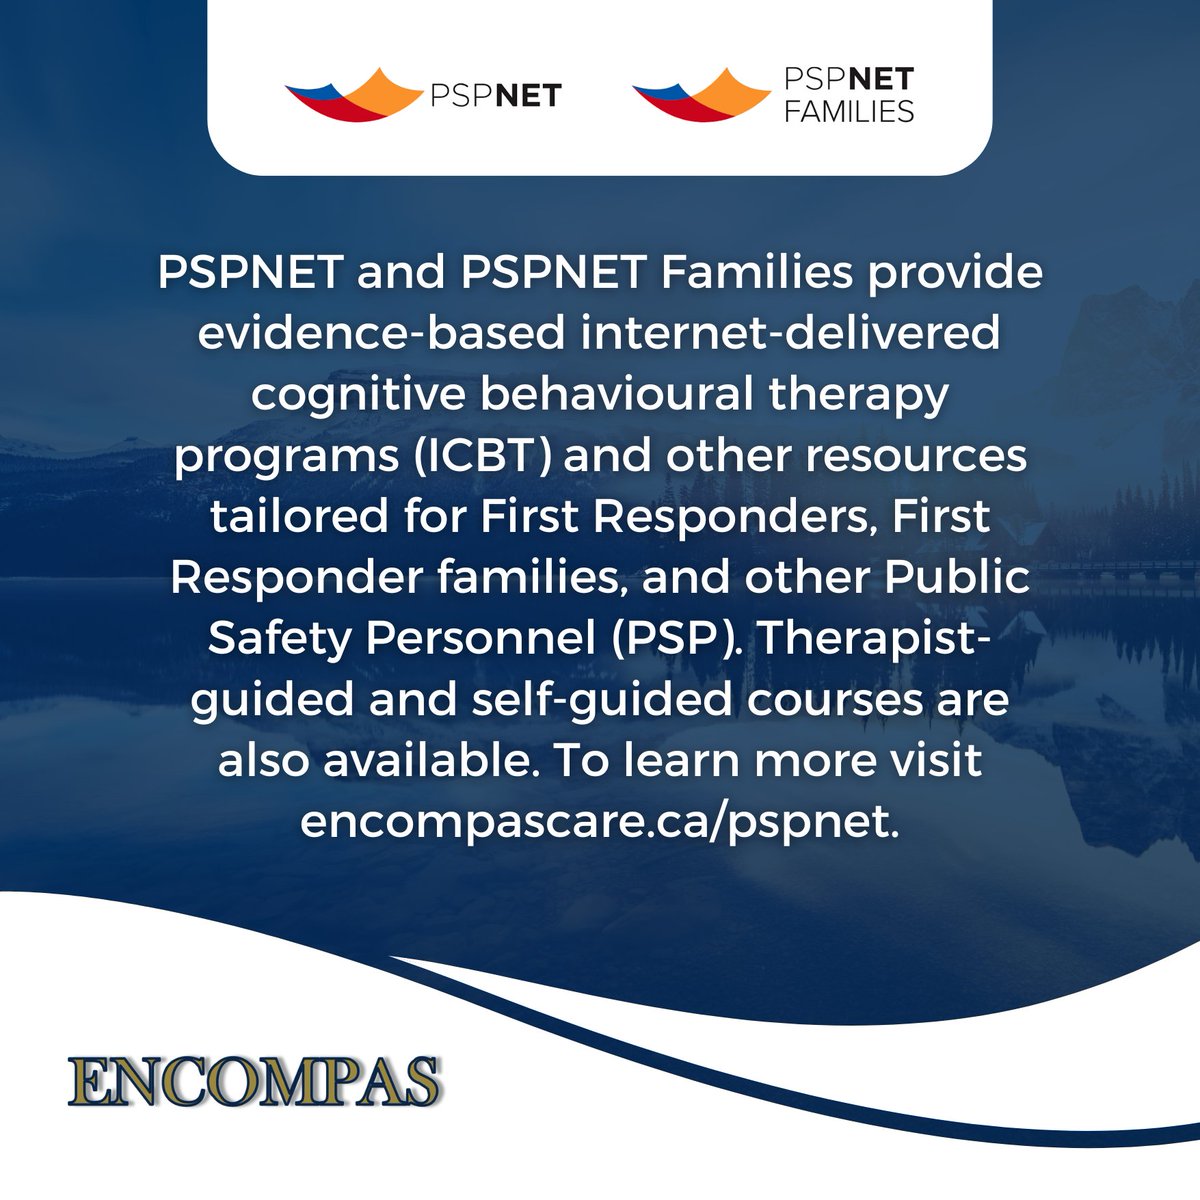 We are pleased to share excellent free resources developed under the Government of Canada’s National Action Plan on Post-Traumatic Stress Injuries. Through PSPNET, a part of the Canadian Institute for Public Safety Research and Treatment (CIPSRT), you can access evidence-based…